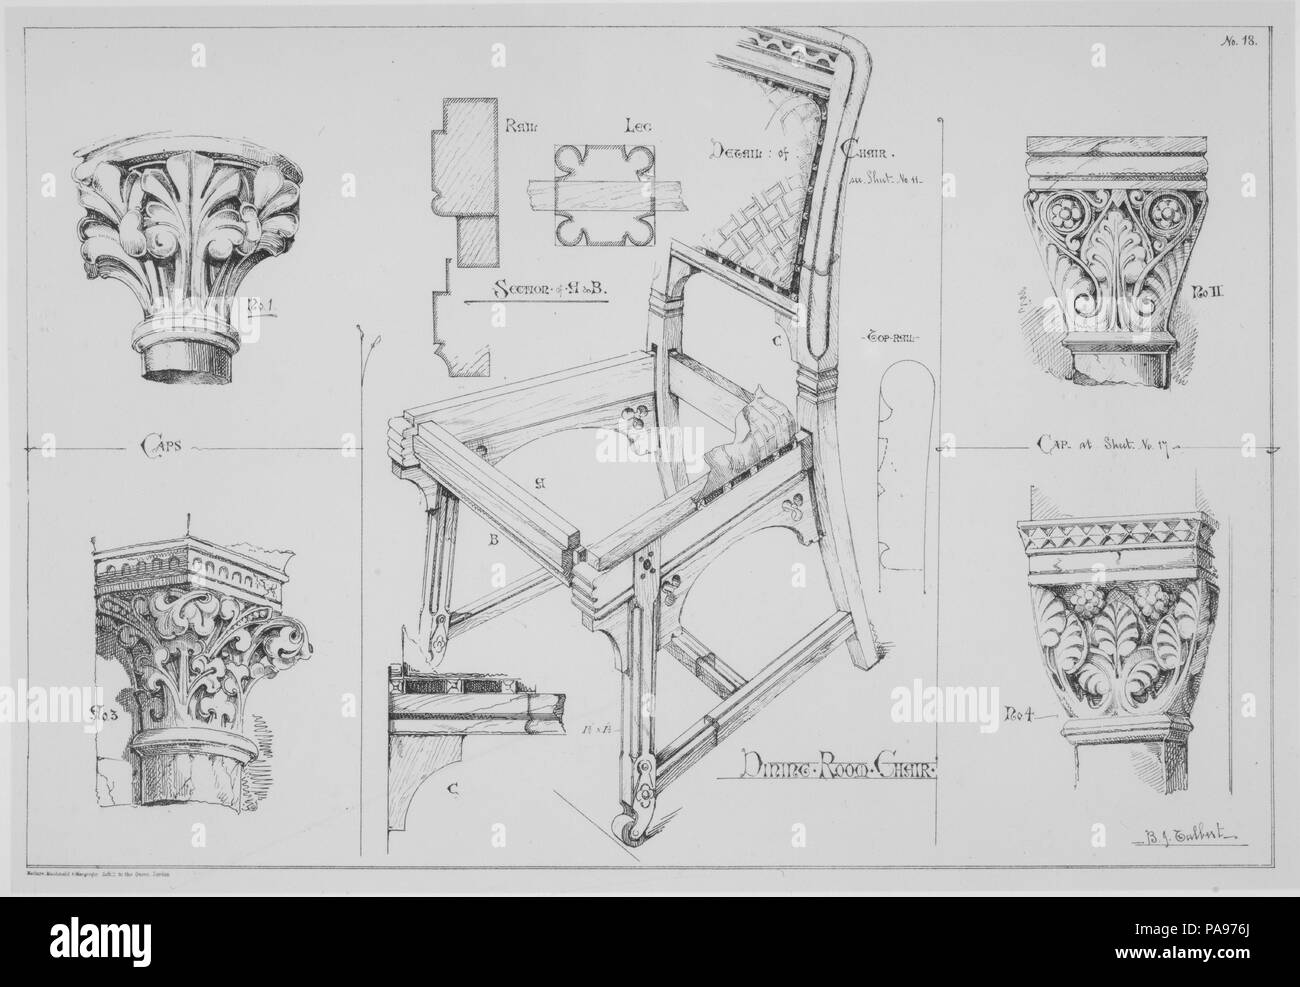 Gothic Forms Applied to Furniture, Metal Work and Decoration for Domestic Purposes. Designer: Bruce J. Talbert (British, Dundee, Scotland 1838-1881 London). Dimensions: 18 1/8 x 12 5/8 x 3/8 in. (46 x 32 x 1 cm). Lithographer: Maclure, Macdonald & Macgregor (London); S. Ayling (British, active 1860s). Publisher: S. Birbeck (Birmingham, UK). Date: 1867. Museum: Metropolitan Museum of Art, New York, USA. Stock Photo